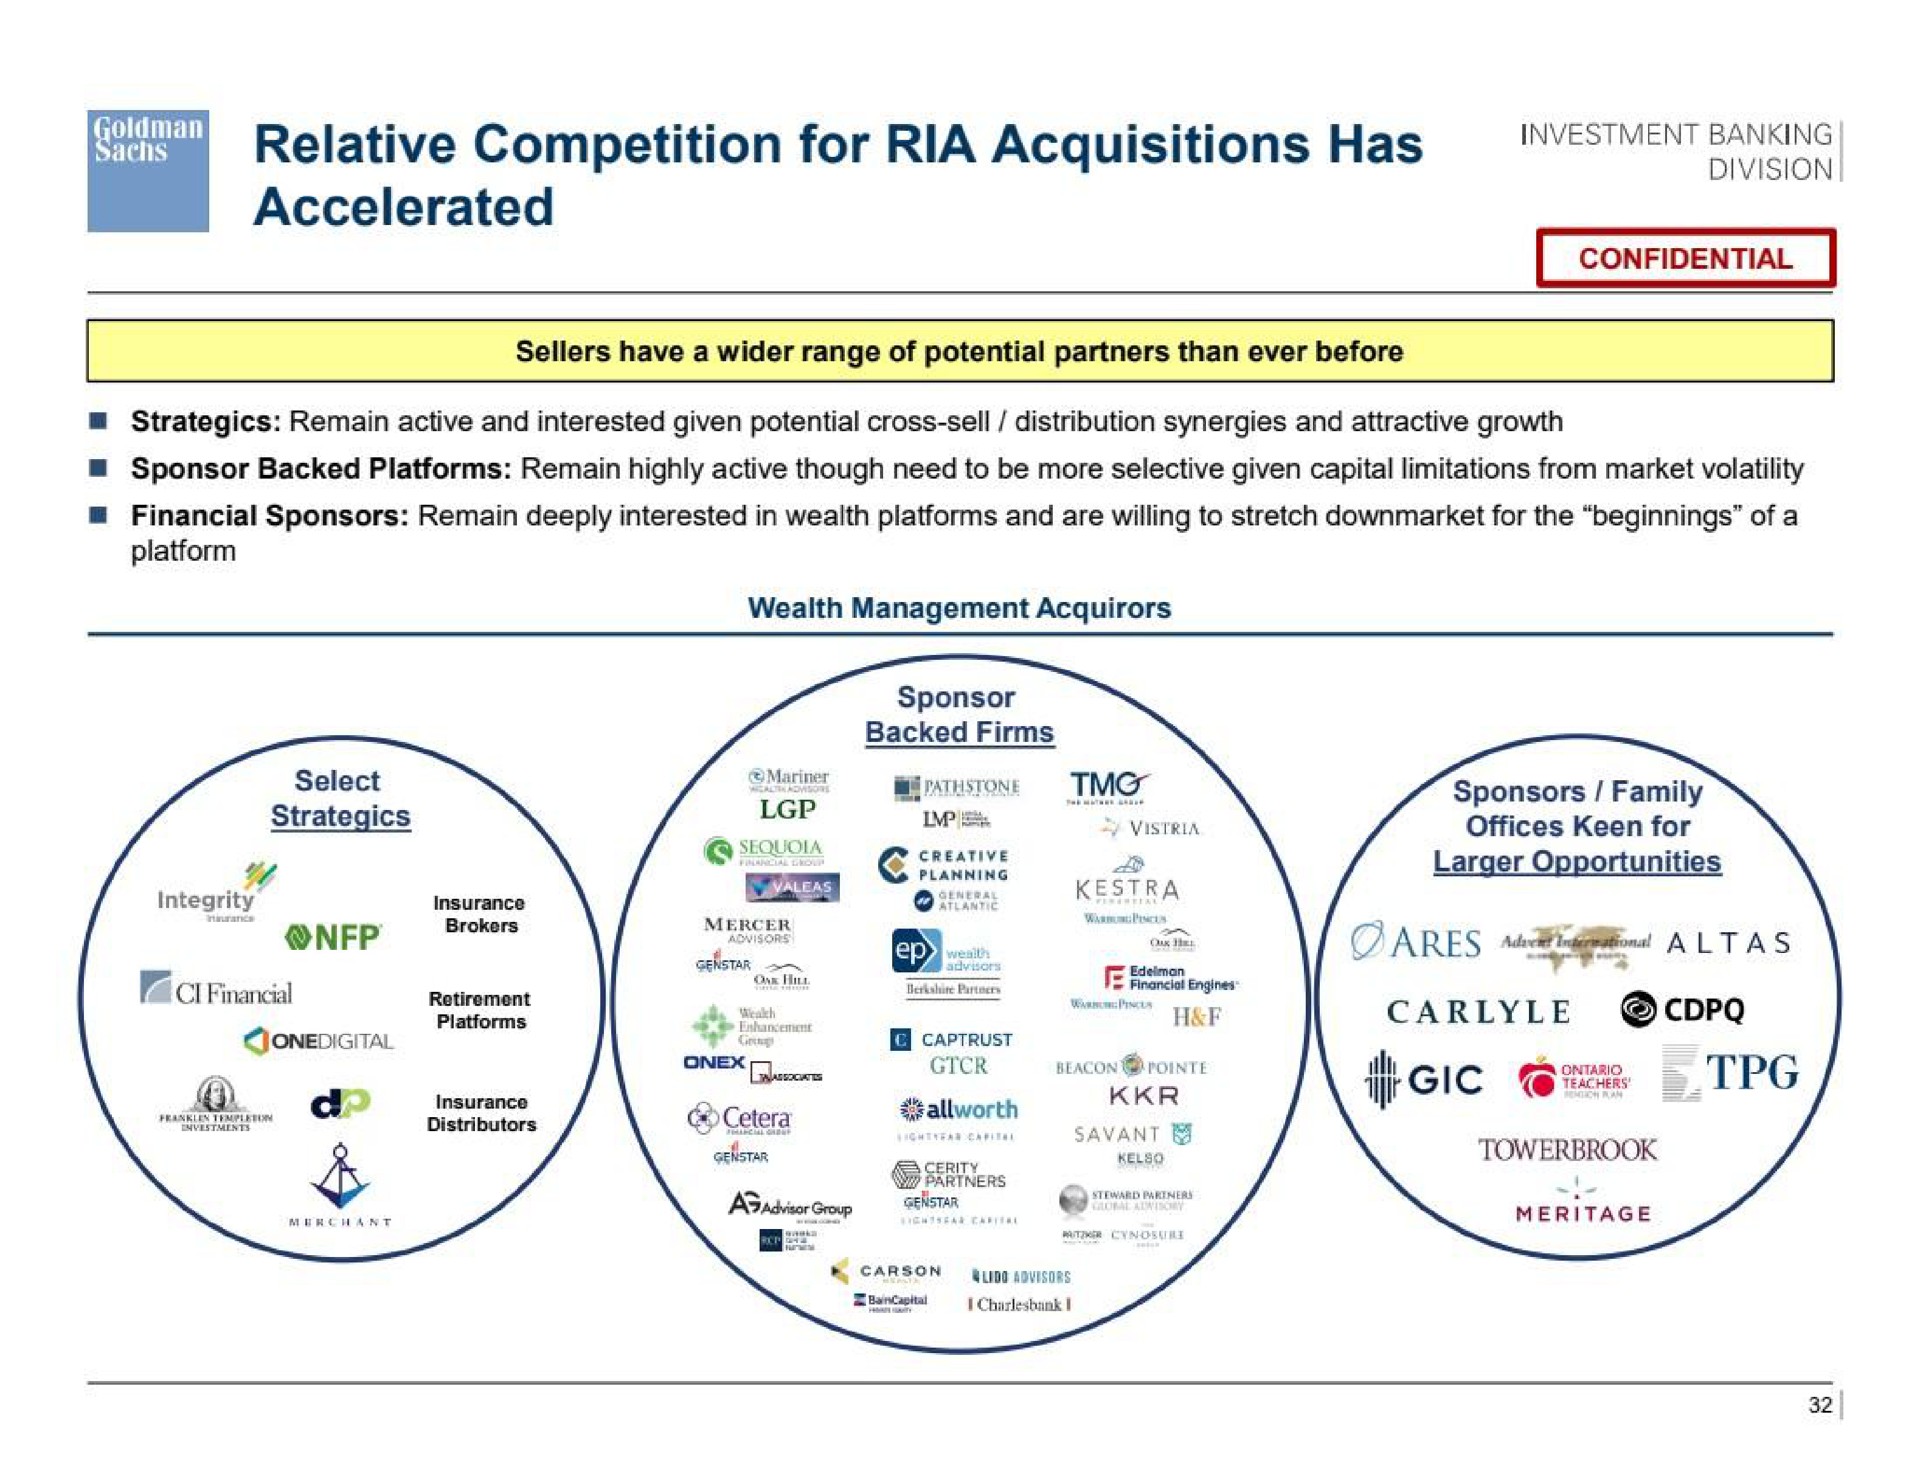 relative competition for ria acquisitions has banking accelerated or hone a a tun alt as in | Goldman Sachs